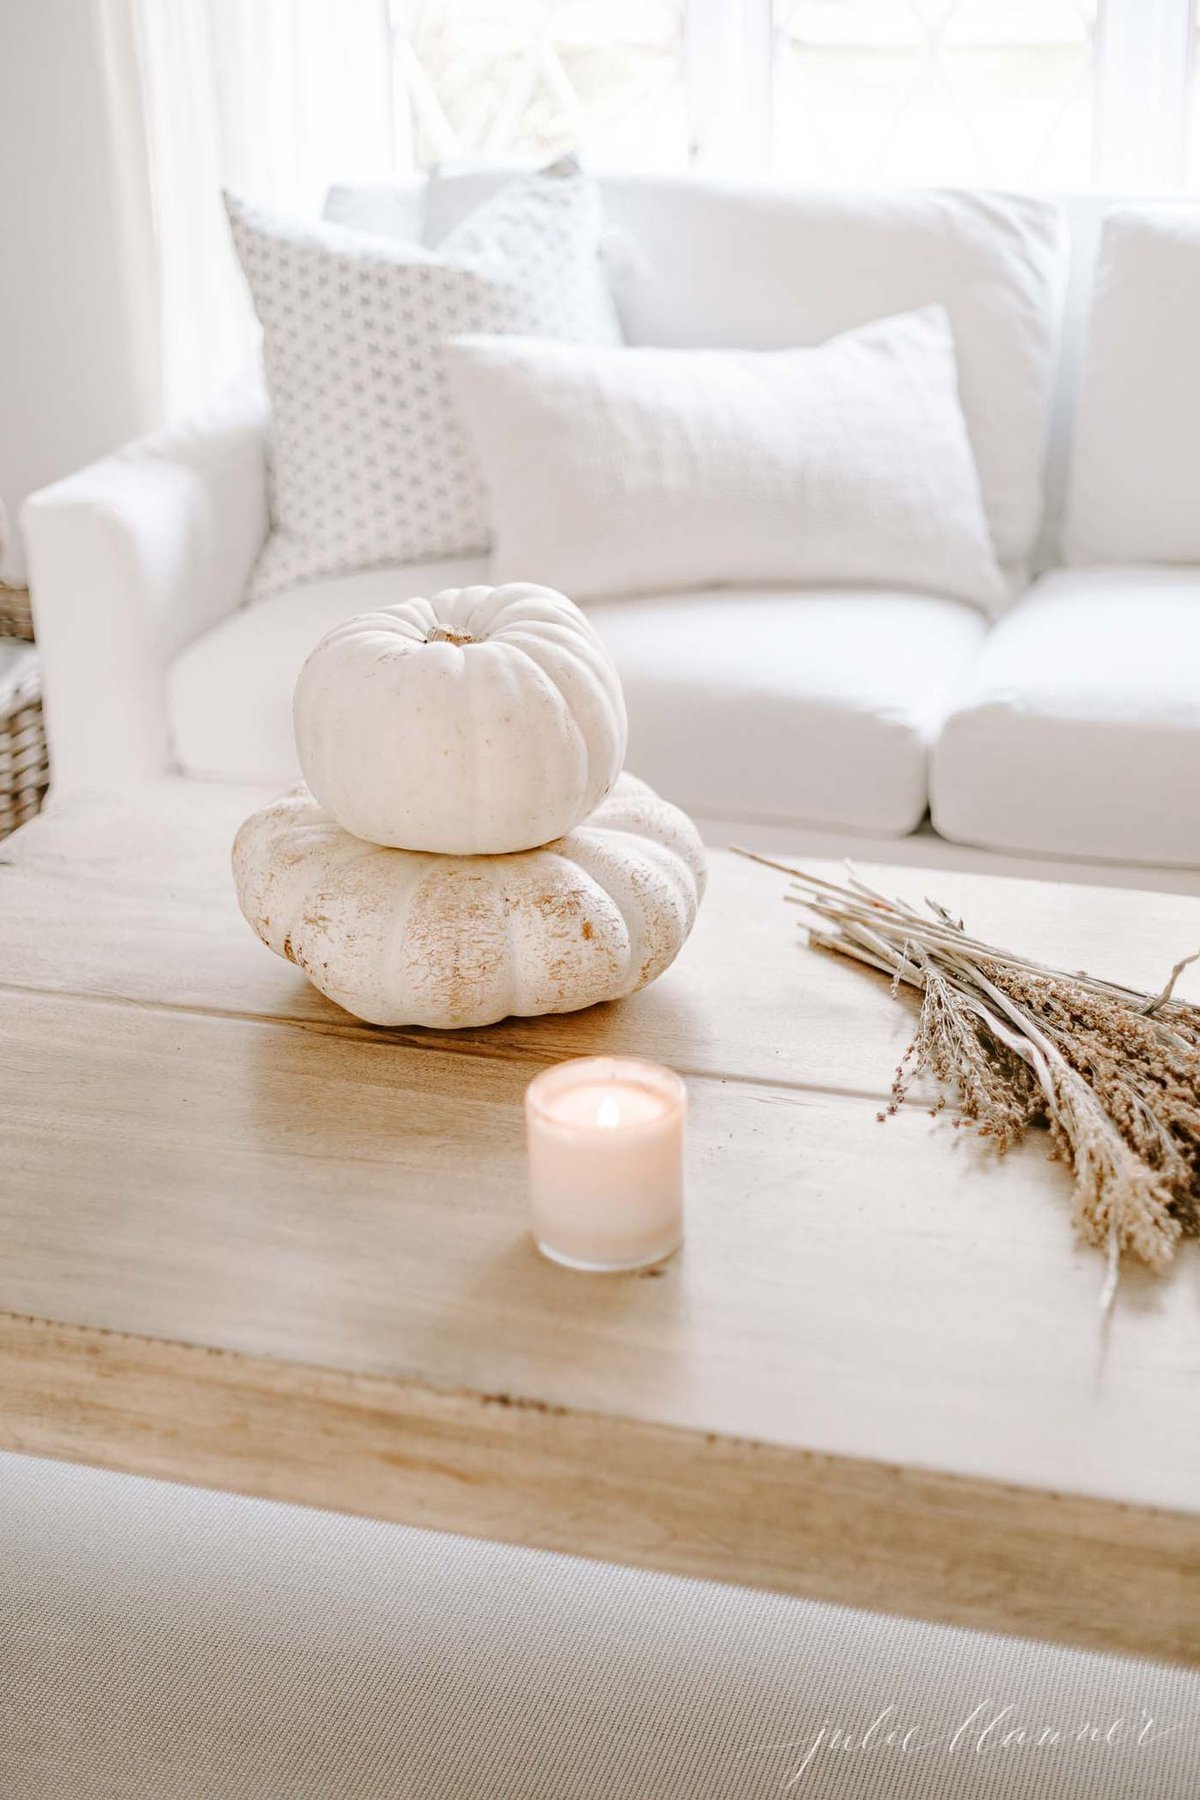 Coffee table featuring a candle and white pumpkins, open basket filled with blankets in background.